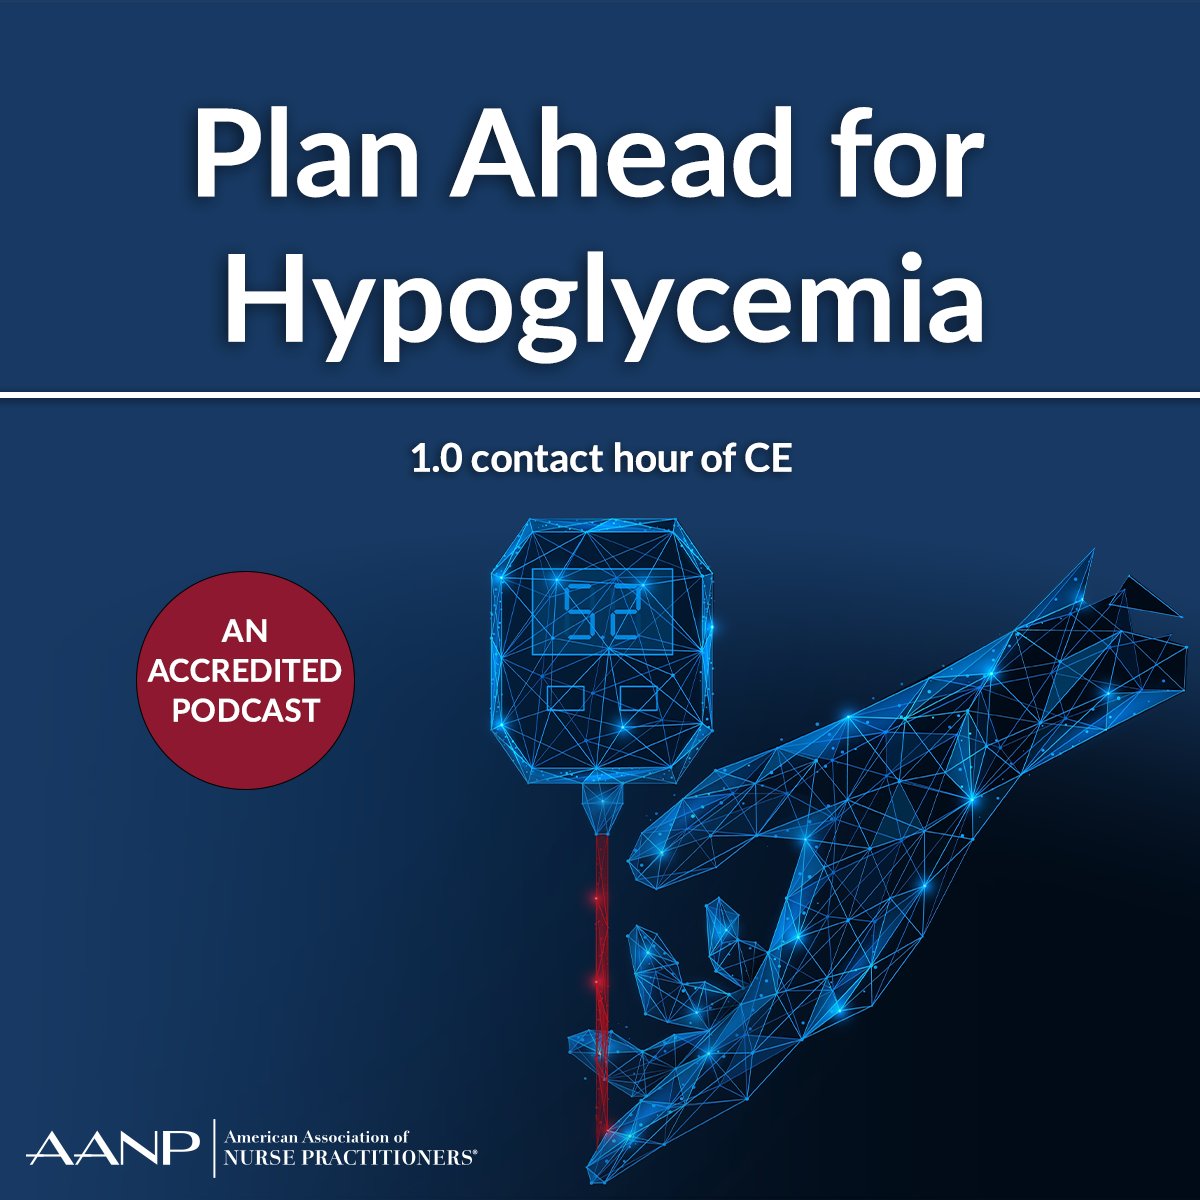 On the latest episode of NP Pulse: The Voice of the Nurse Practitioner®, diabetes experts Debbie Hinnen and Dr. Shannon Idzik provide an overview of hypoglycemia, its treatments and the critical importance of having a plan in place for your patients. aanp.org/podcast.